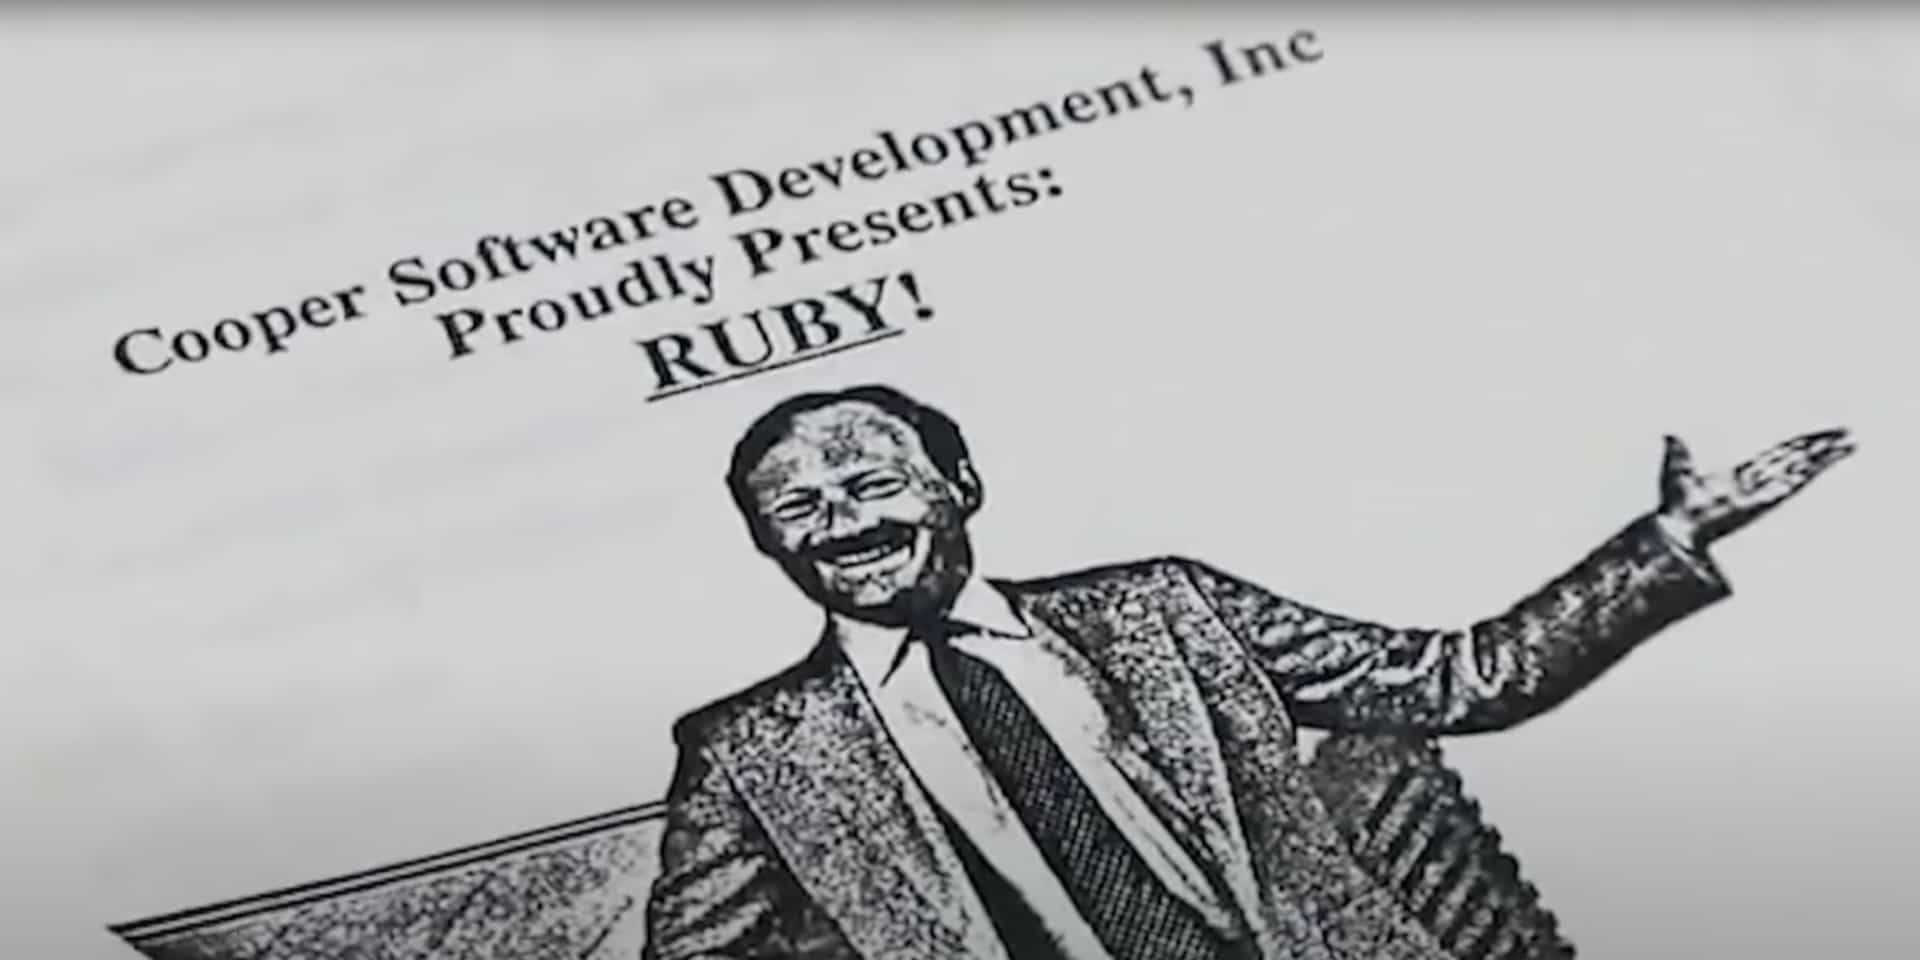 A photograph of a printed manual titled 'Cooper Software Development, Inc proudly presents: RUBY!' which has an image of a happy man in a suit with arms wide open.